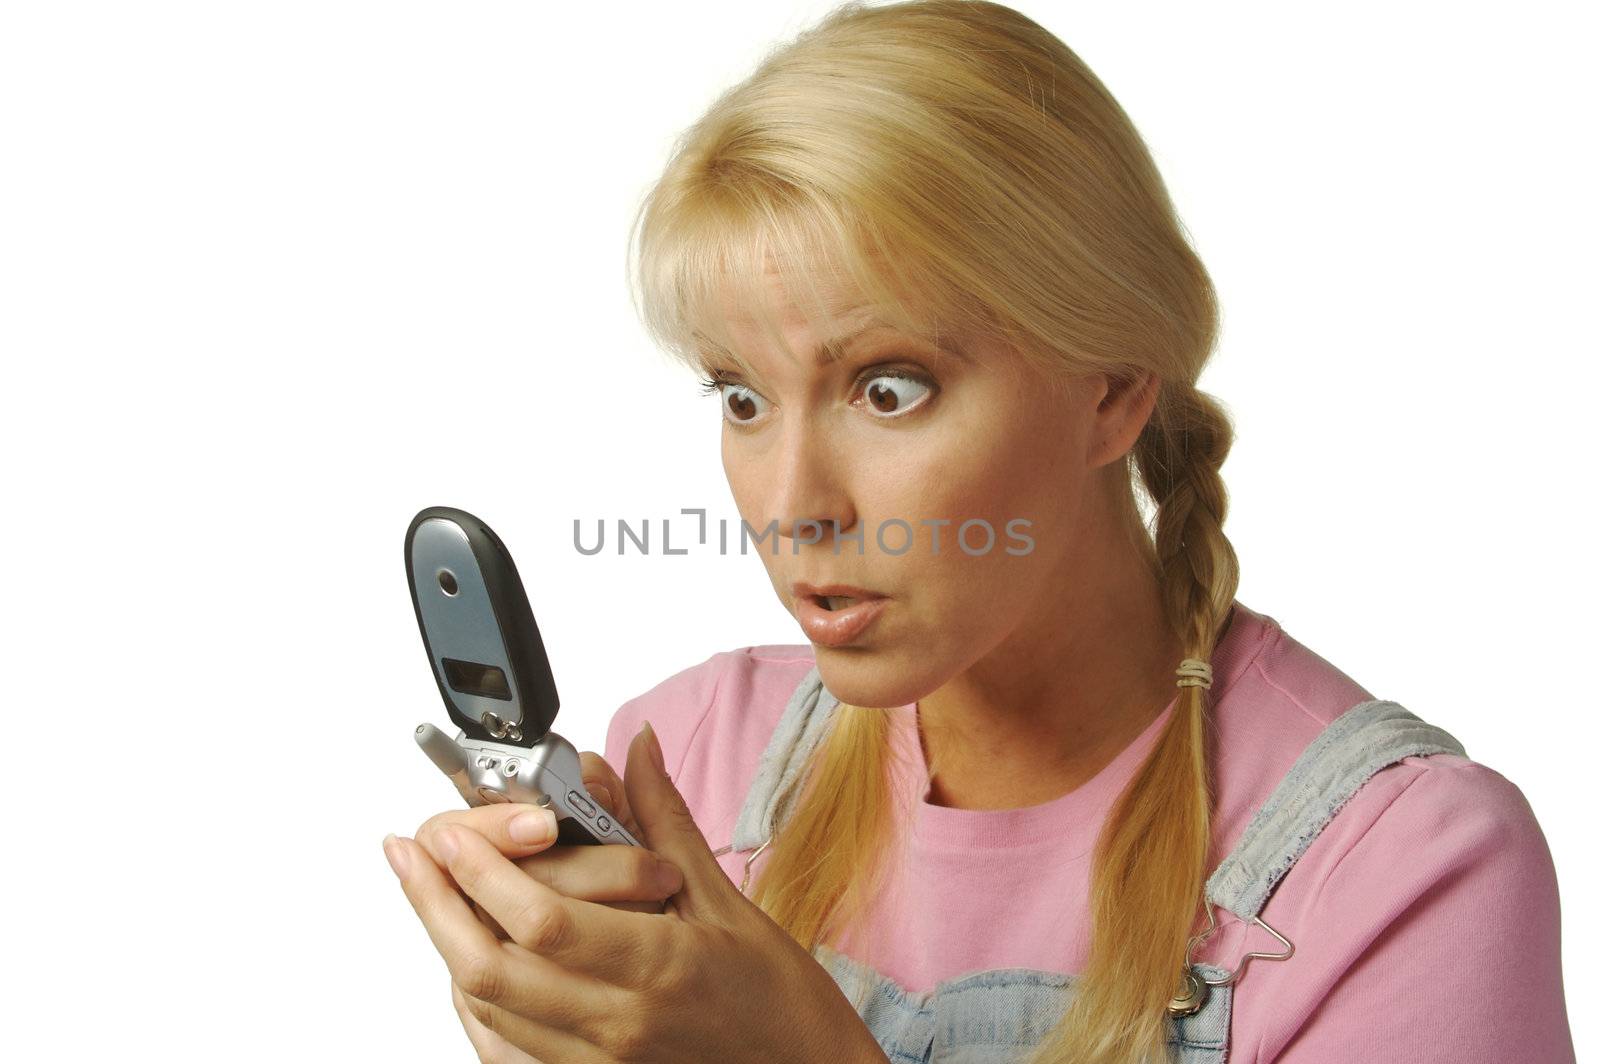 Enamored Girl Texting with Cell Phone by Feverpitched